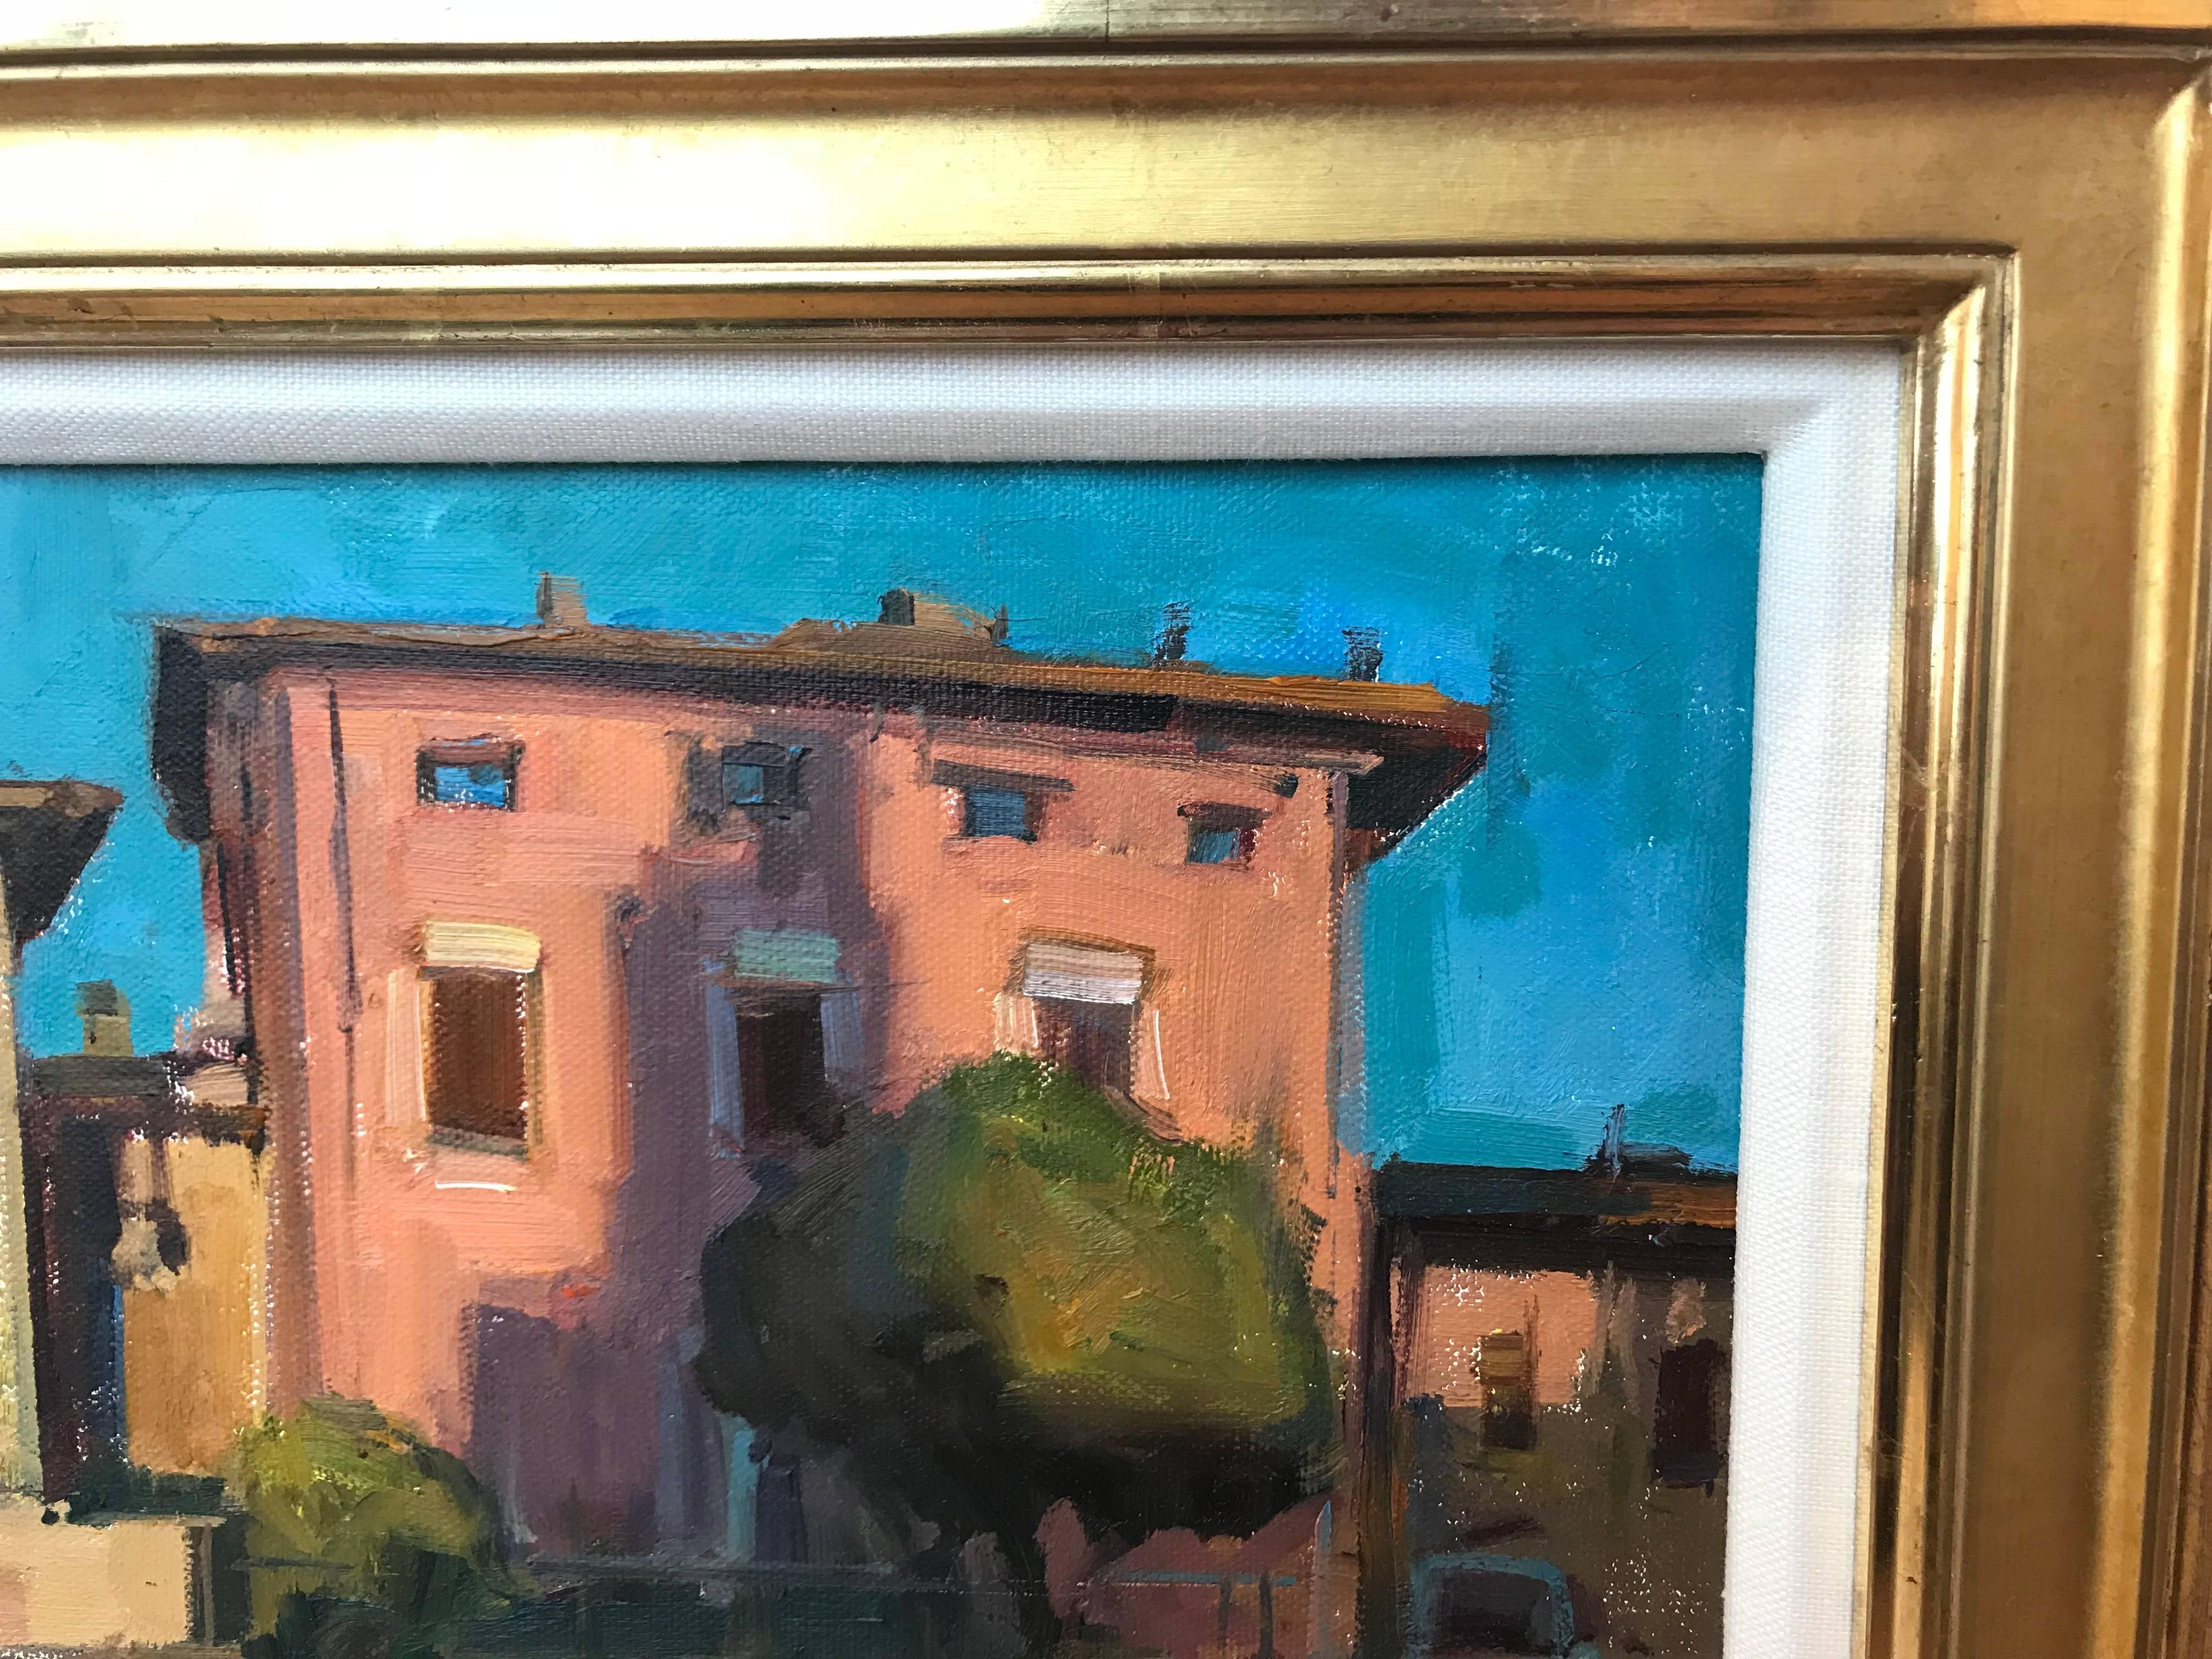 Architecture and landscape view of Todi, Italy. Giltwood frame with fabric matting. Acrylic on canvas. Signed.